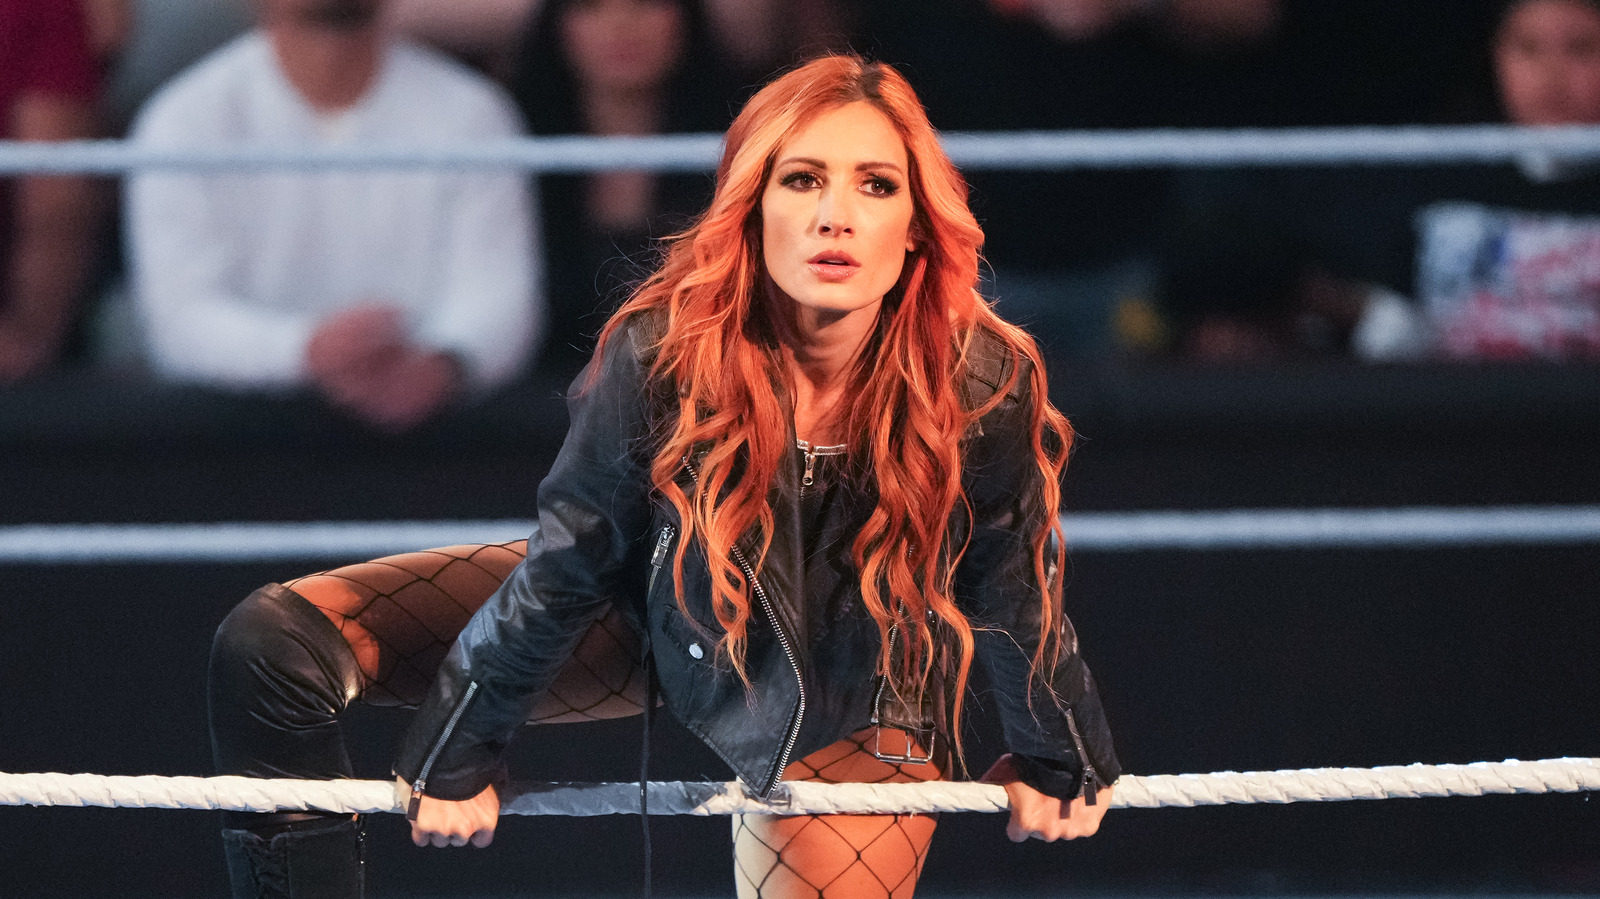 Booker T Reacts To Becky Lynch Winning Battle Royal For Women's Title On WWE Raw